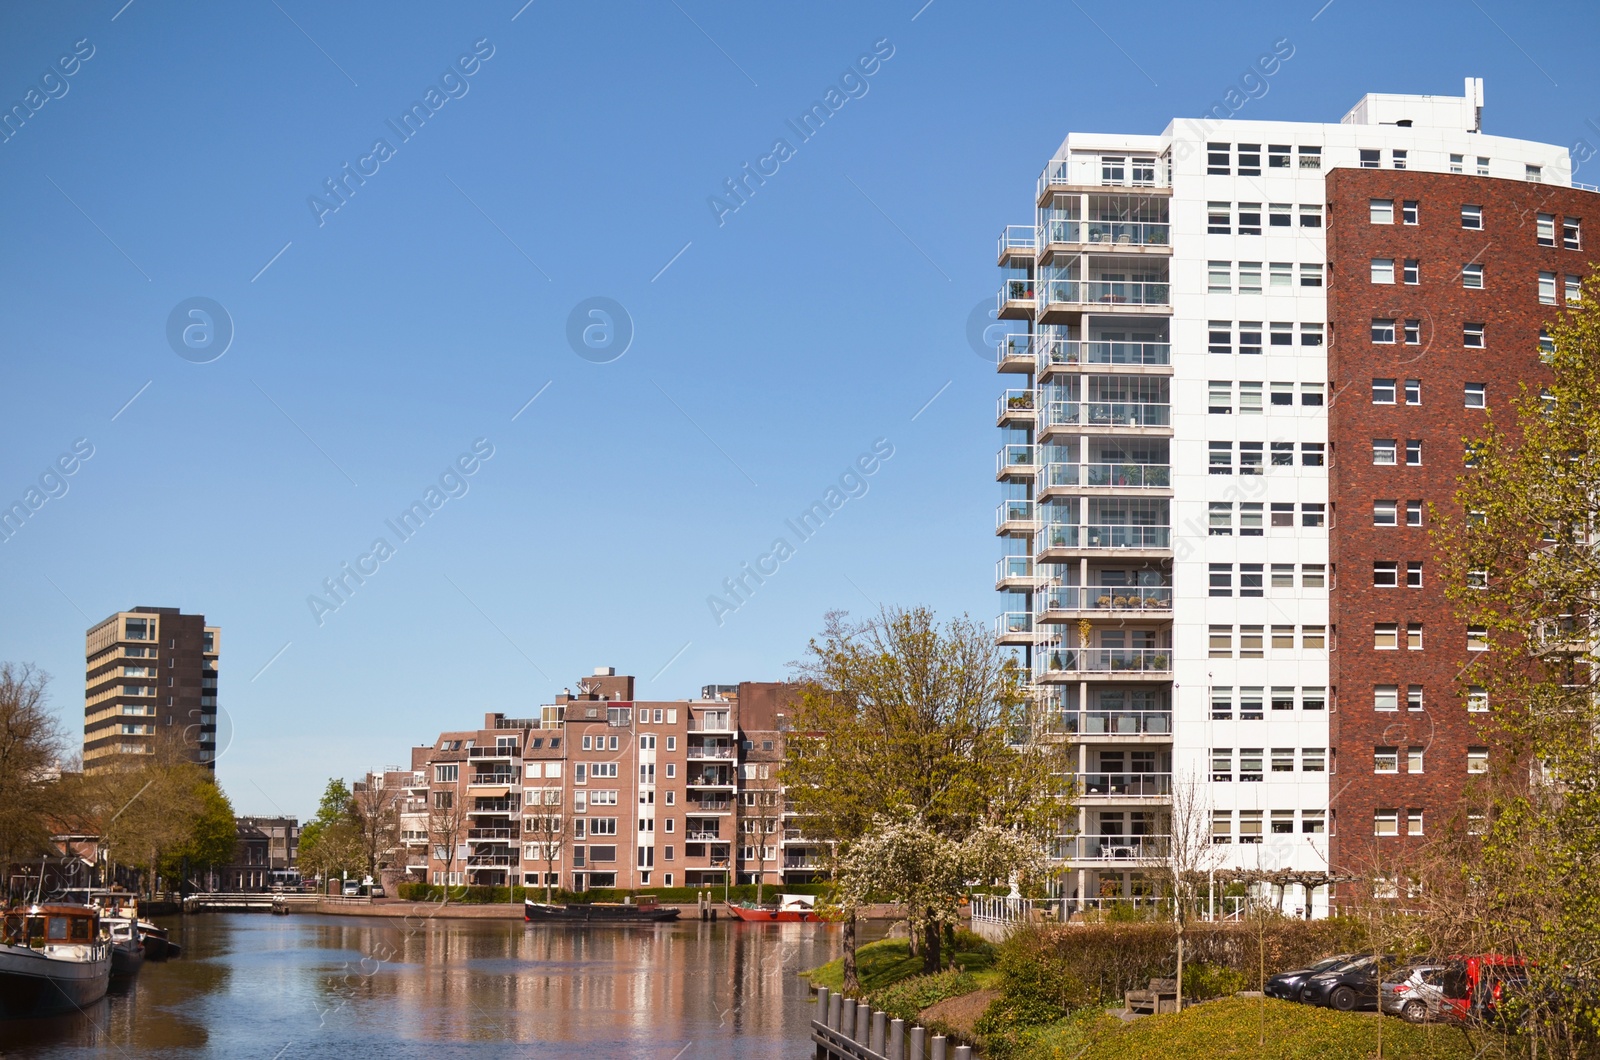 Photo of Beautiful view of cityscape with modern buildings and boats on river